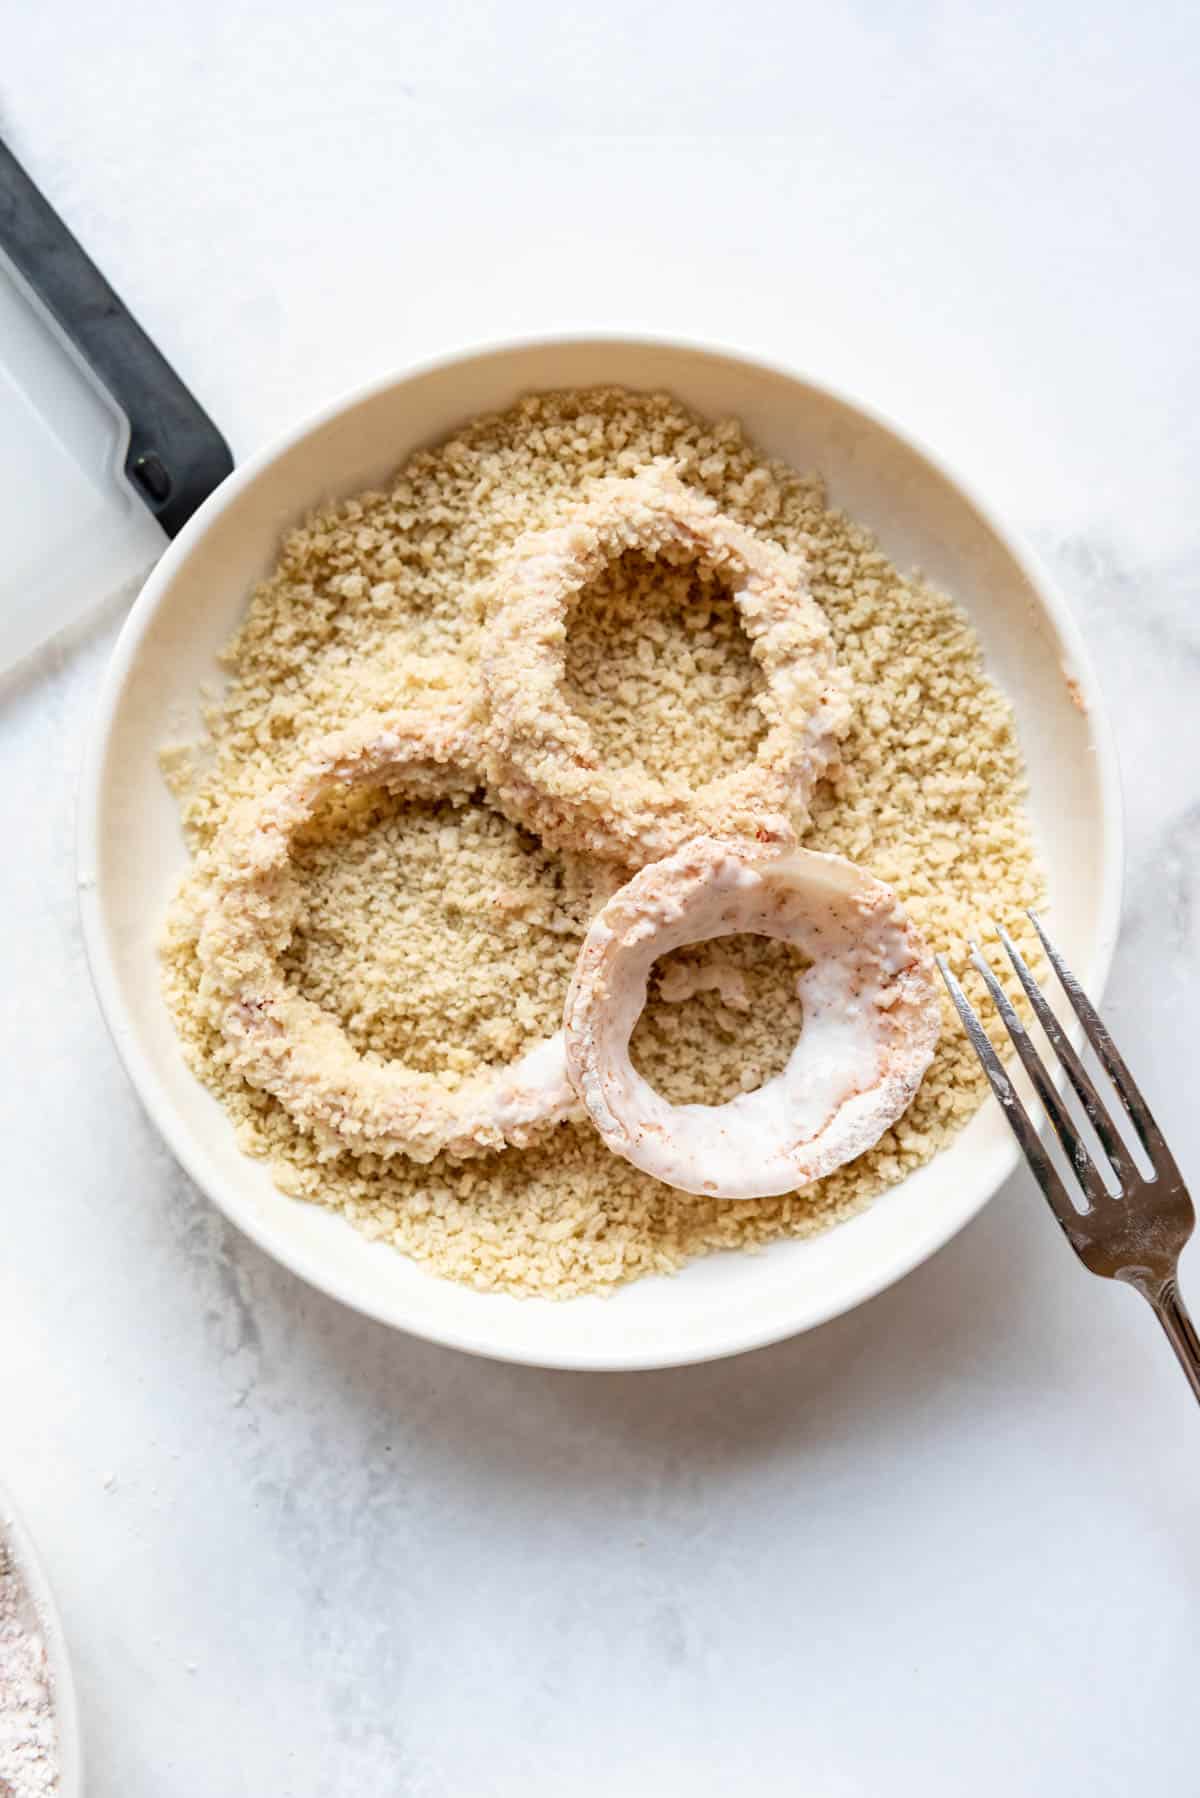 Breading onion rings in a breadcrumb coating before frying.